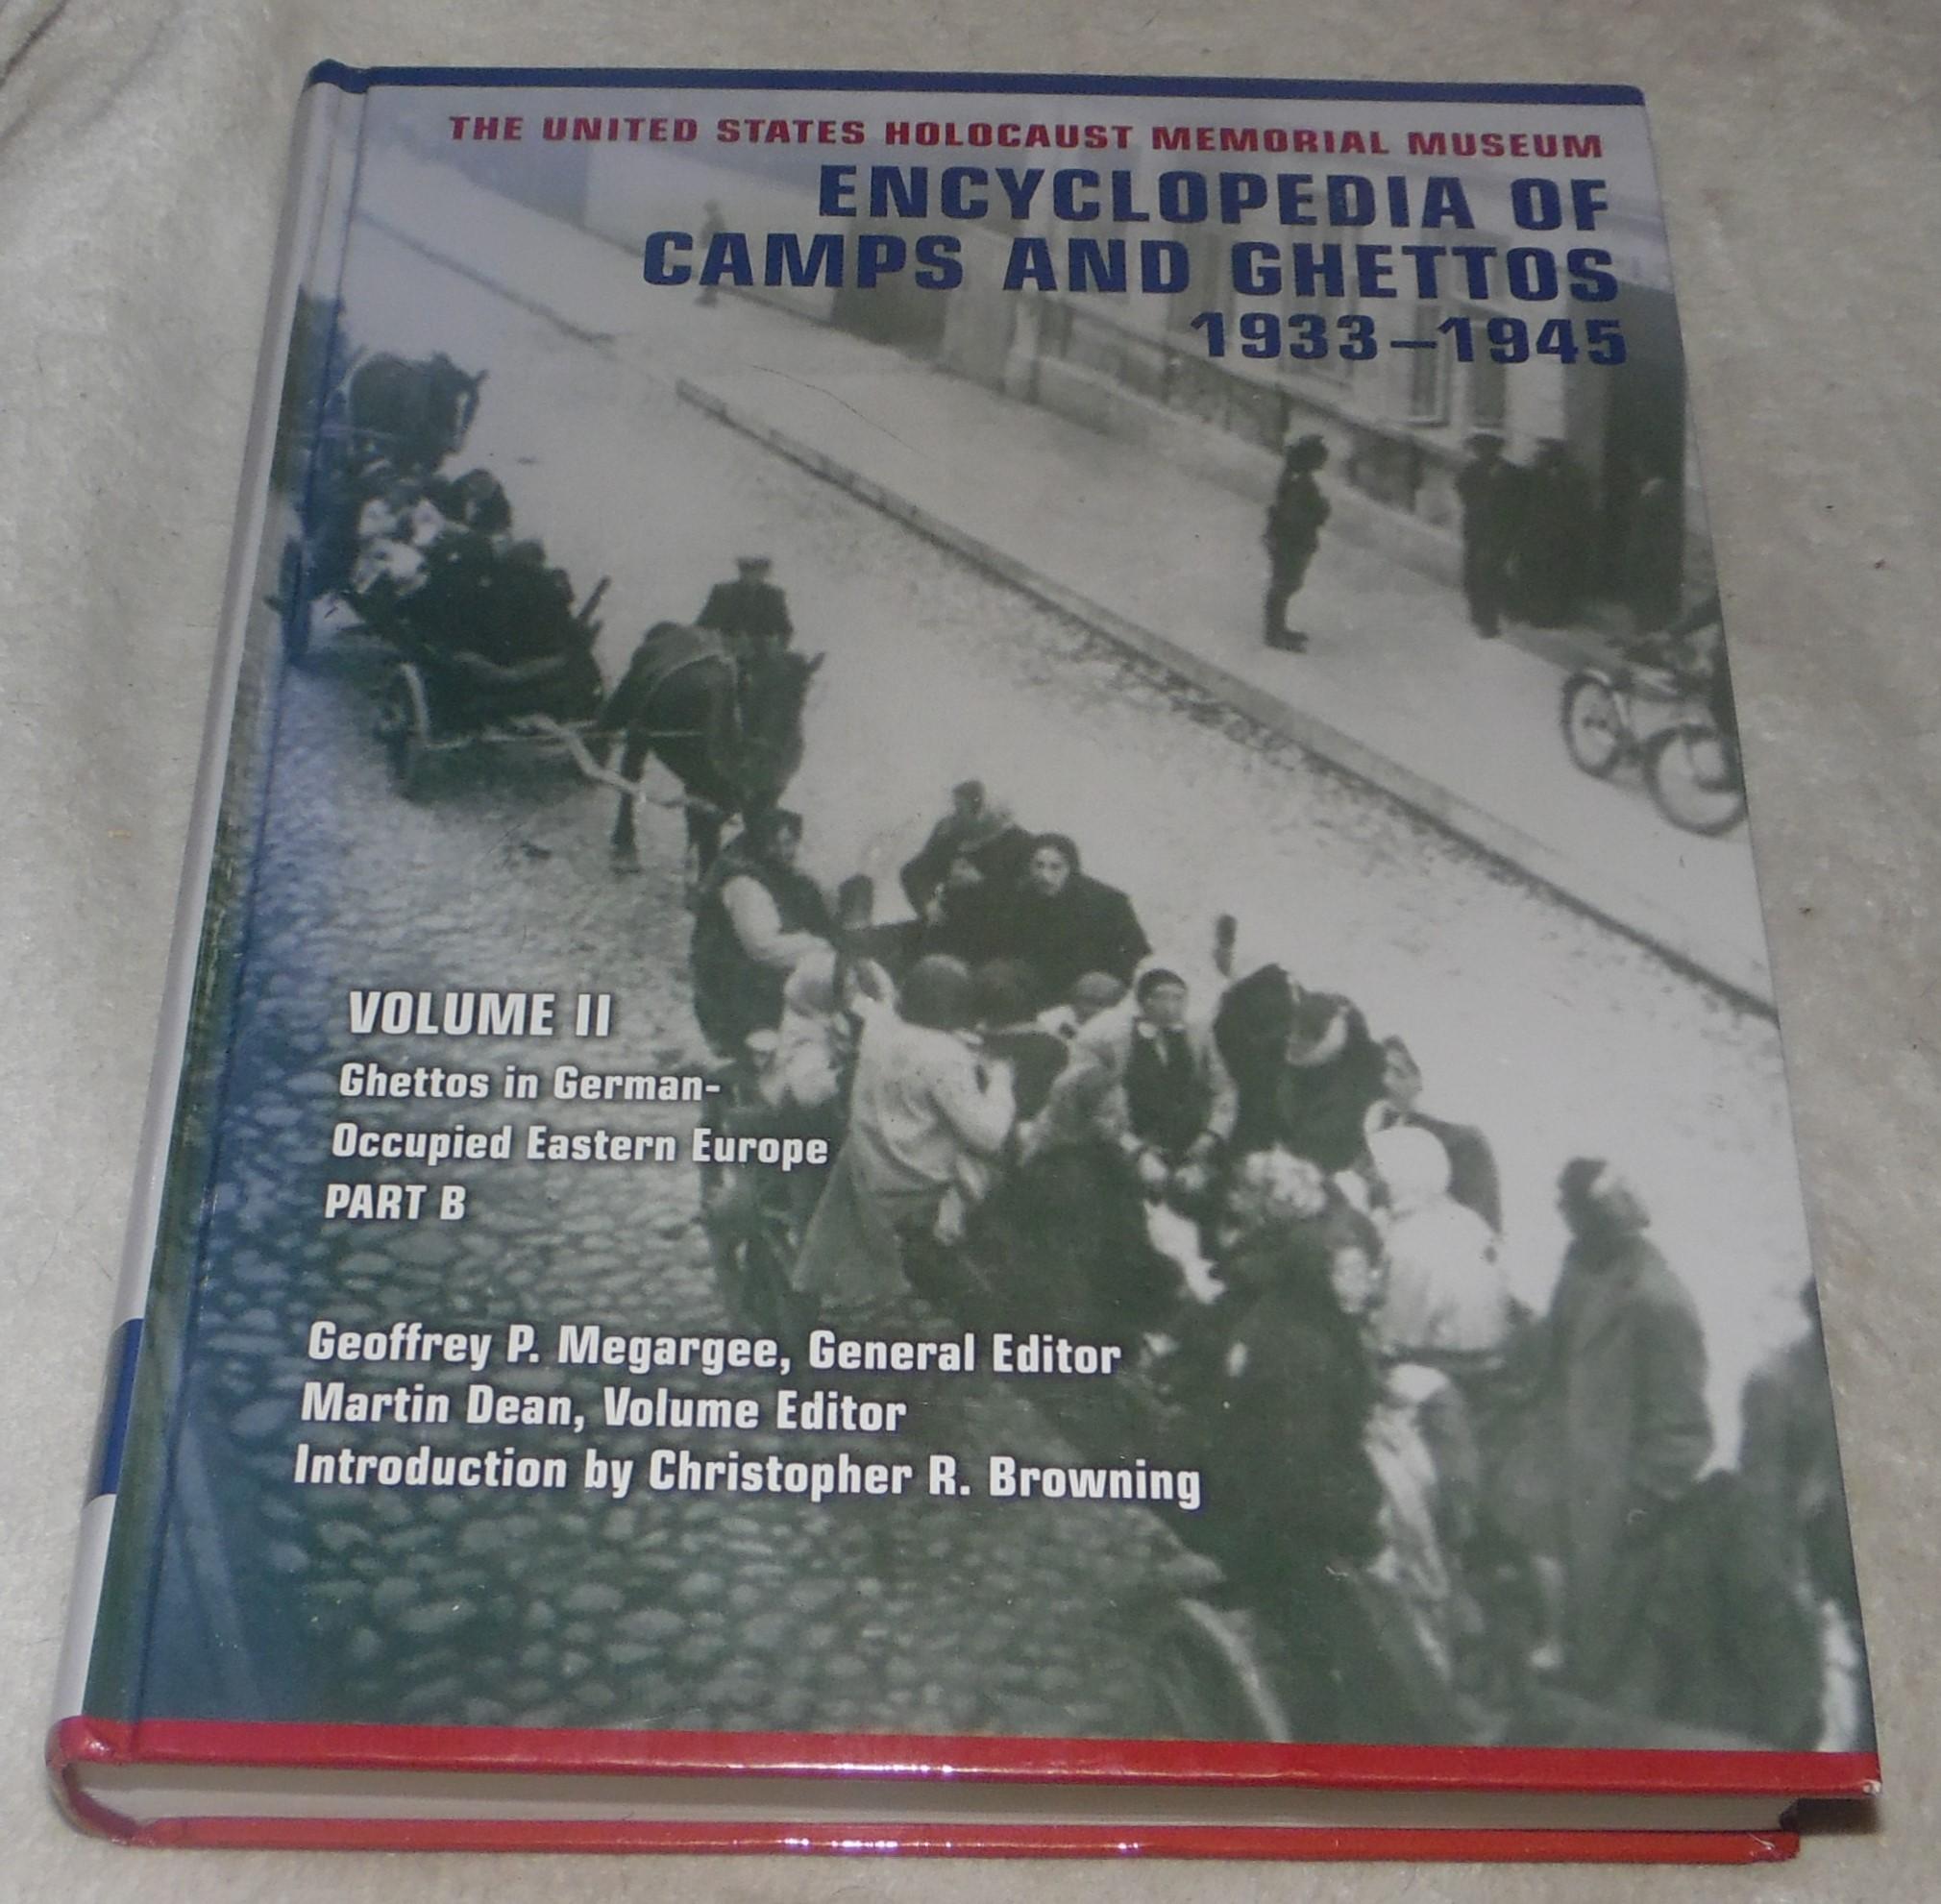 The United States Holocaust Memorial Museum Encyclopedia of Camps and Ghettos, 1933 - 1945, Volume III Part B Camps and Ghettos under European Regimes Aligned with Nazi Germany